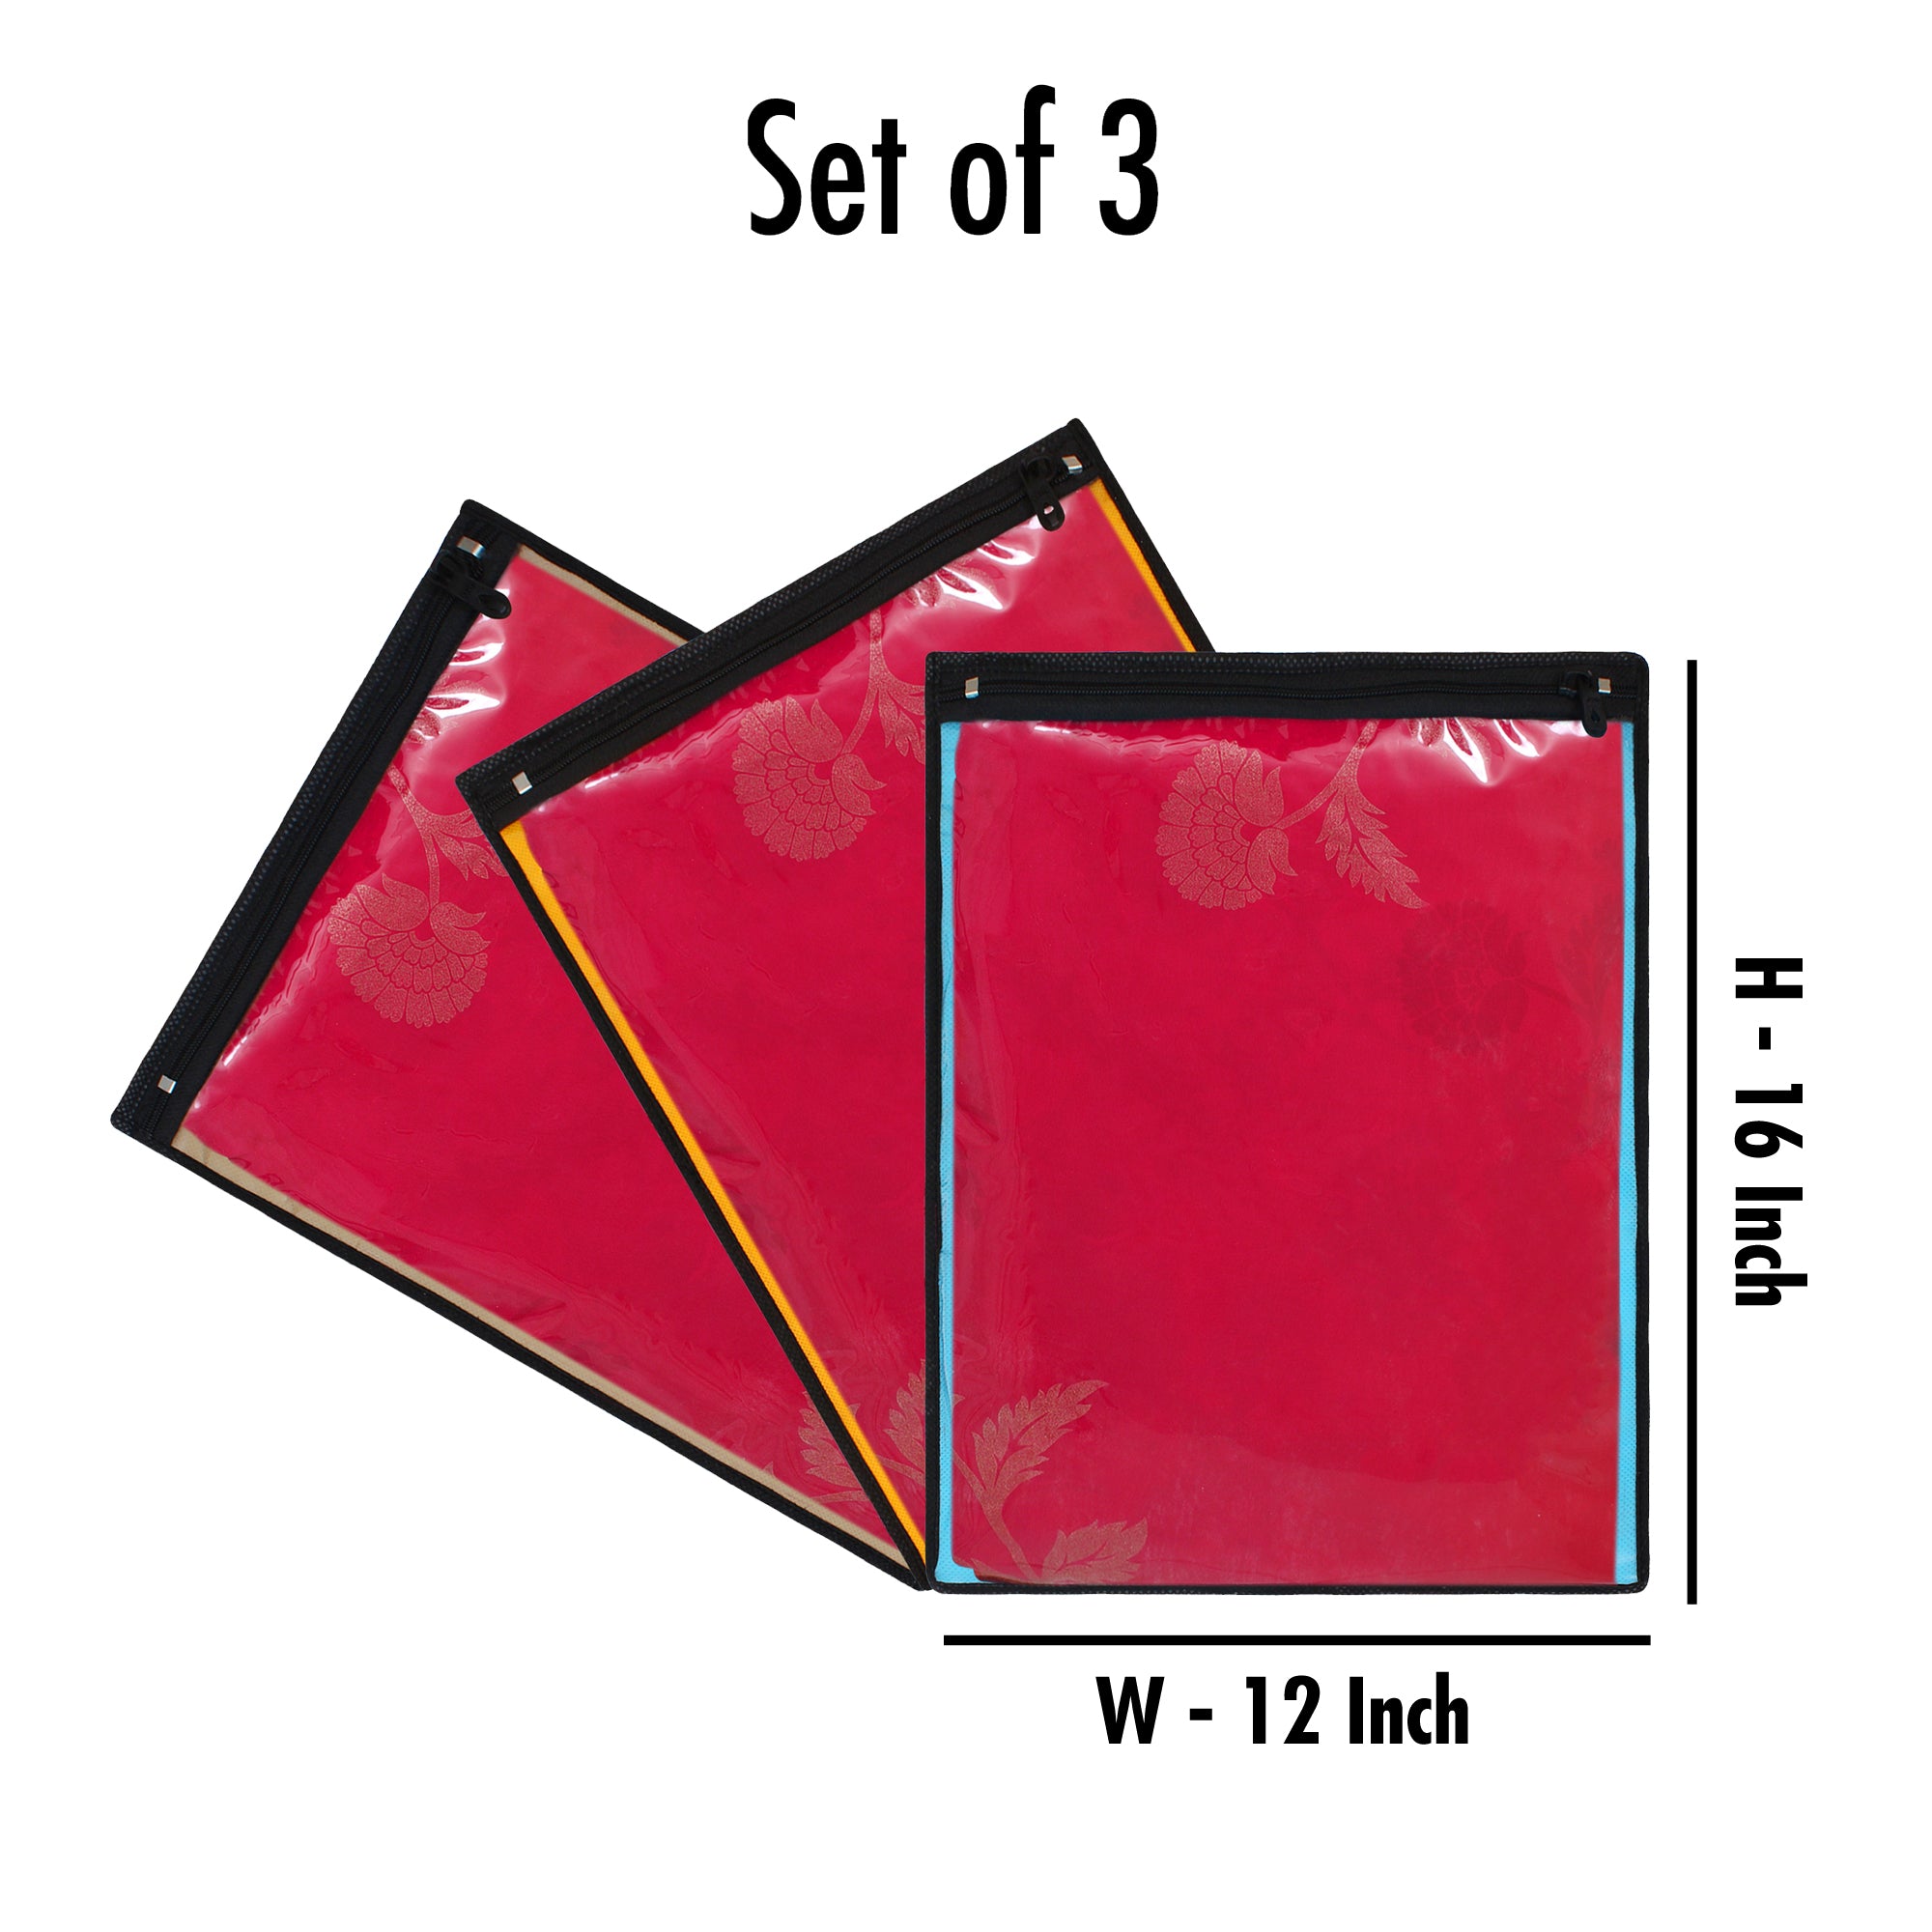 Saree Cover Transparent Storage Bag with Zip, Set of 3, Lite - Dream Care Furnishings Private Limited